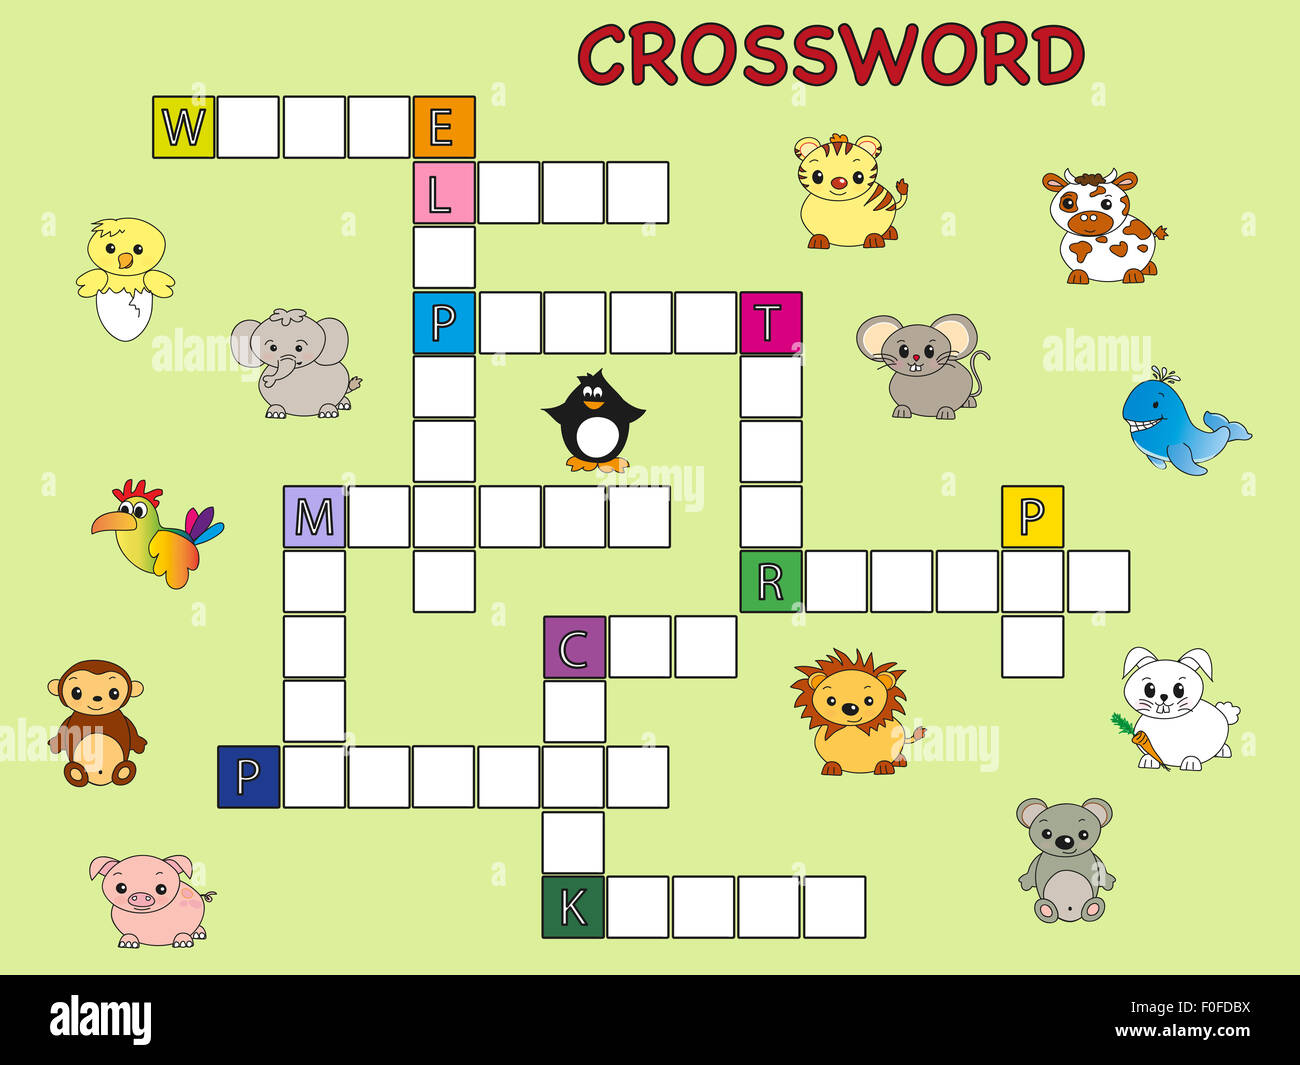 crossword games to play with friends